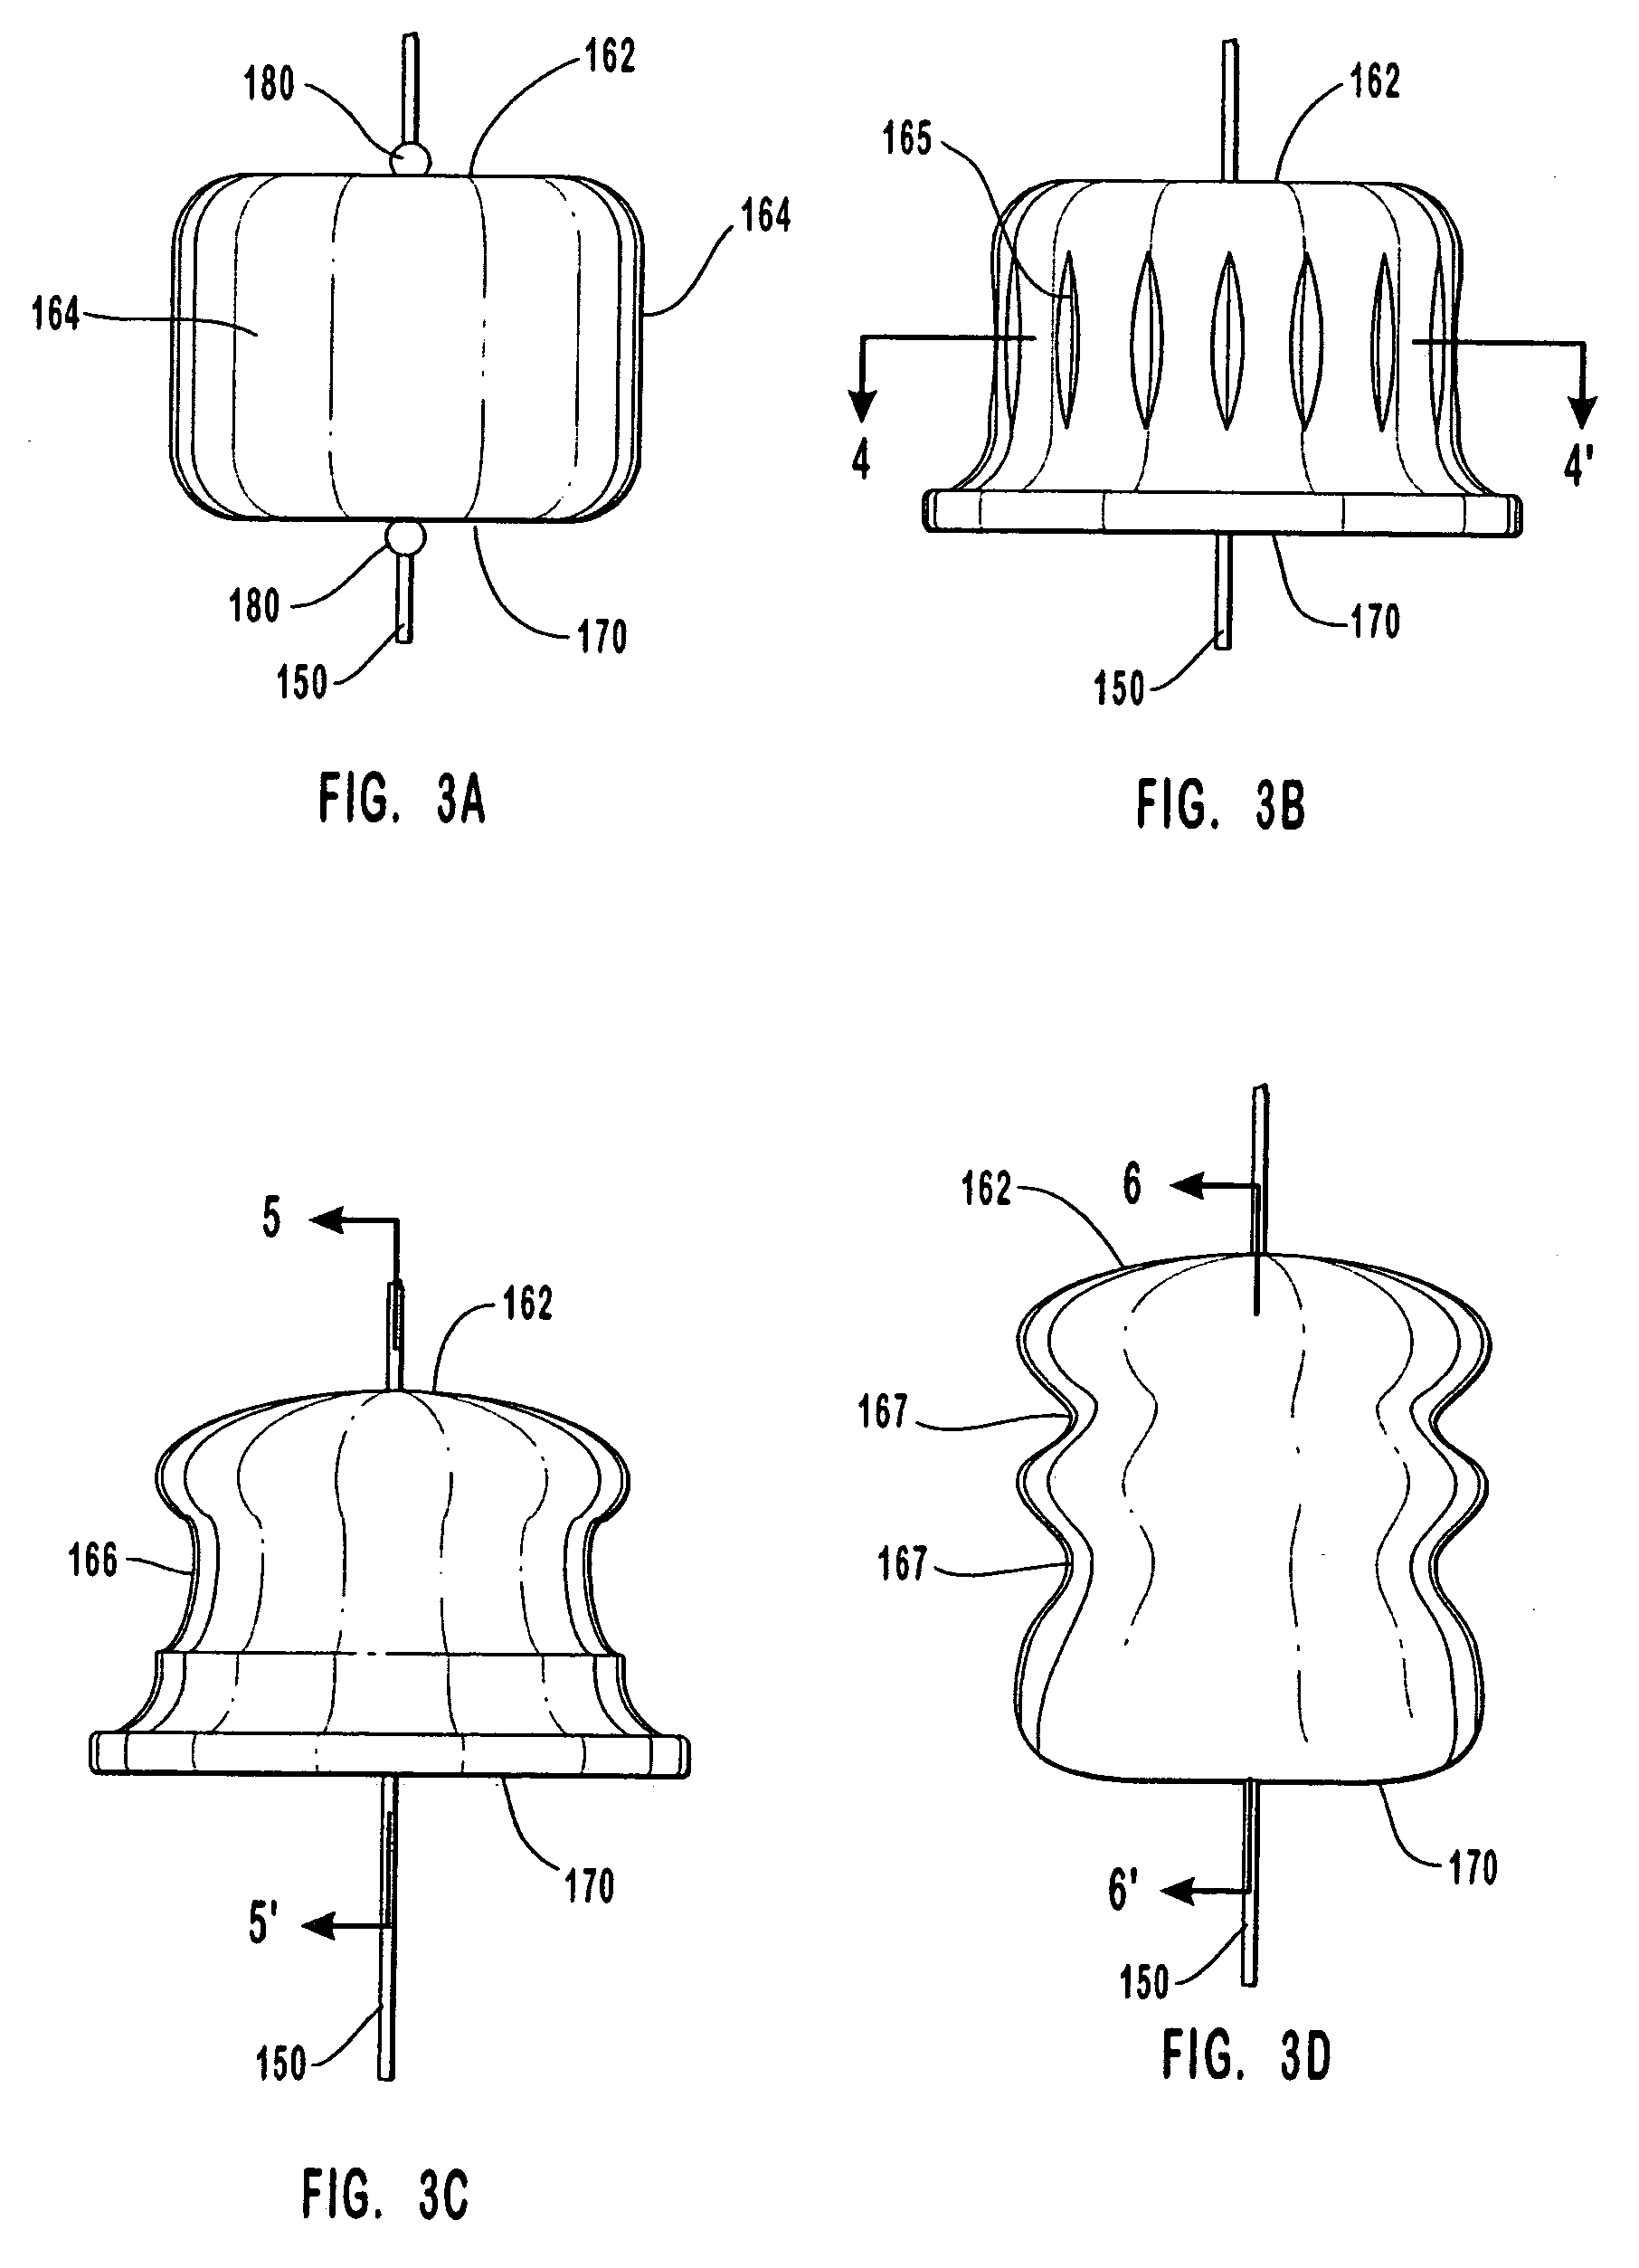 Methods for anastomosis of a graft vessel to a side of a receiving vessel